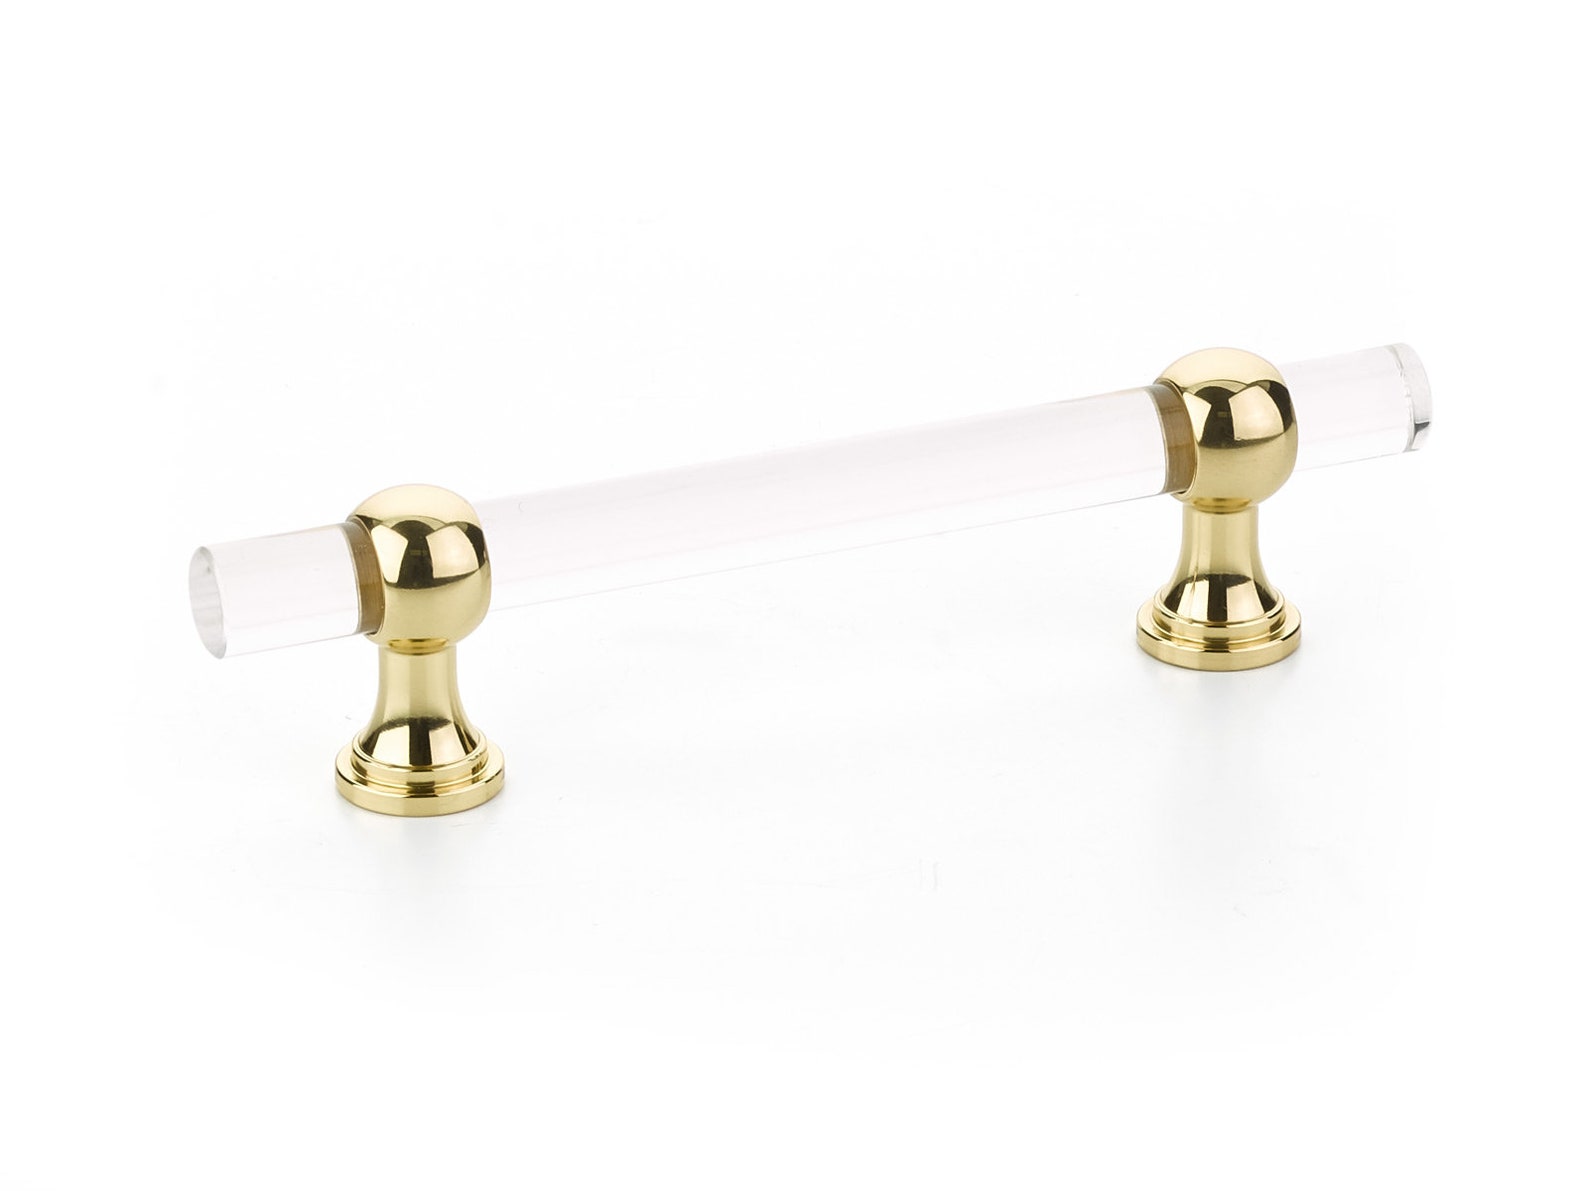 Polished Brass and Lucite "Gleam" Cabinet Knobs and Drawer Pulls (Adjustable) - Forge Hardware Studio